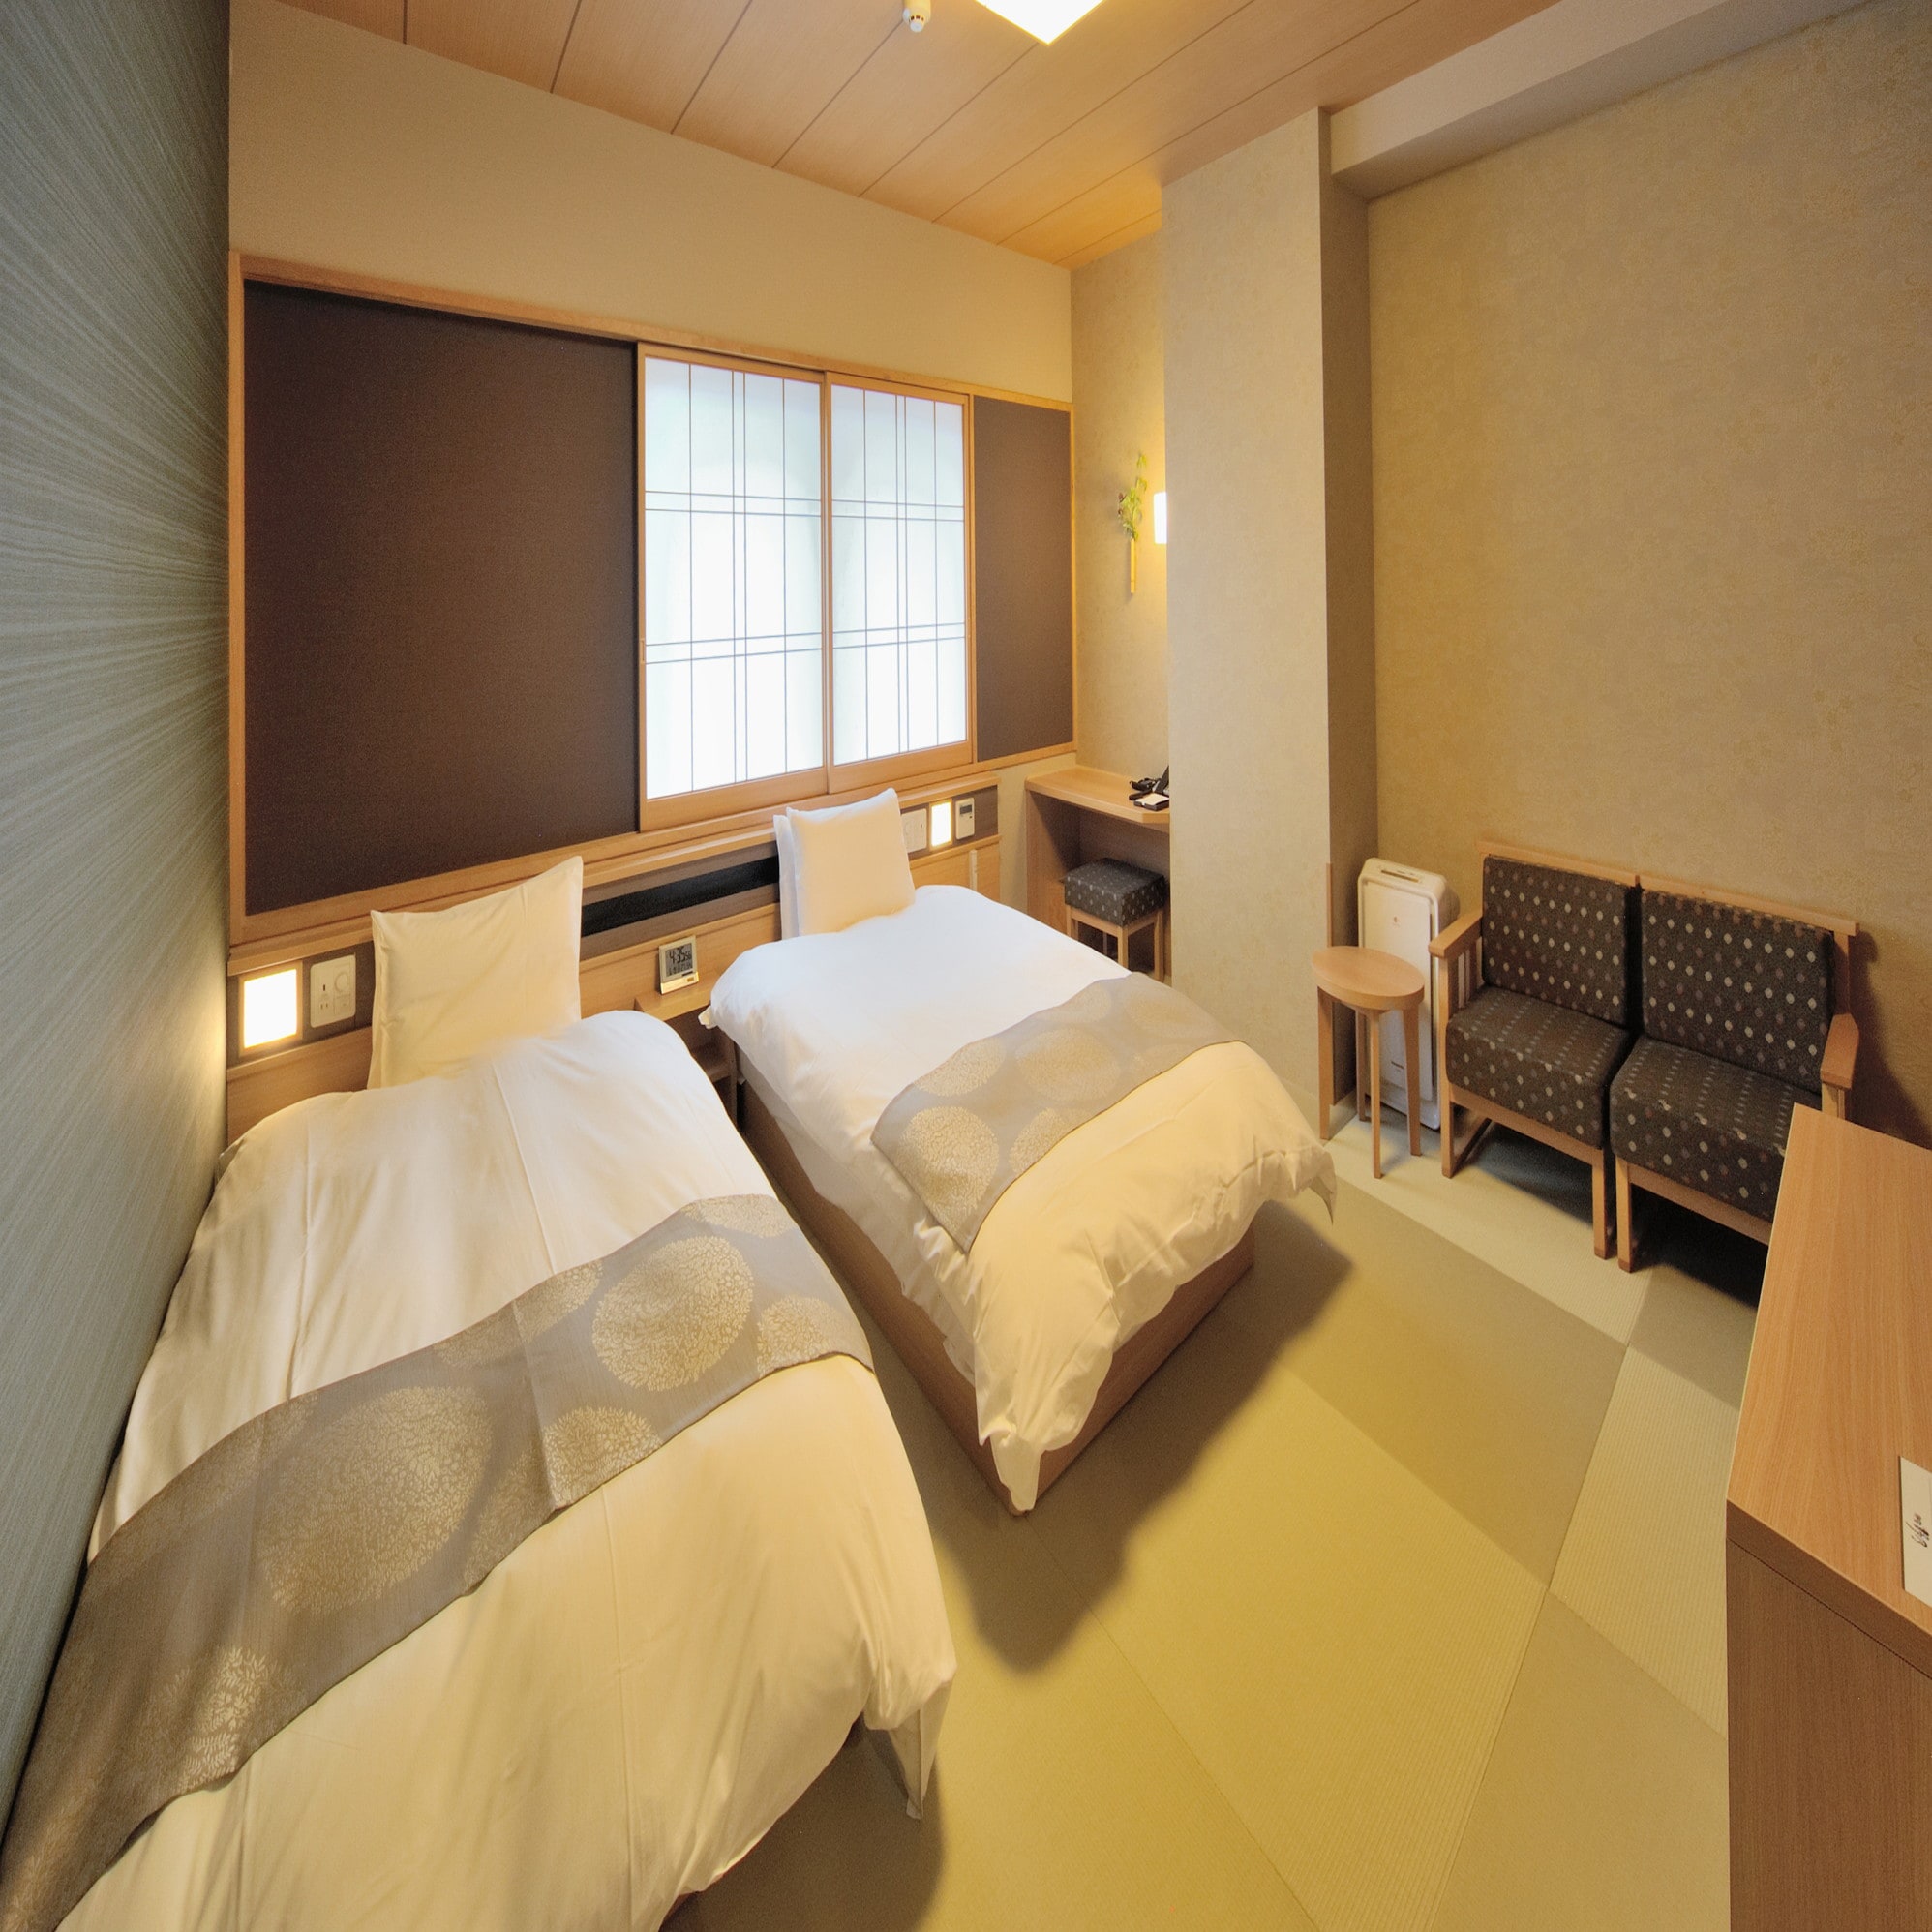 ◇ Twin room on the 2nd floor 20.5 square meters (110 & times; 195 cm)